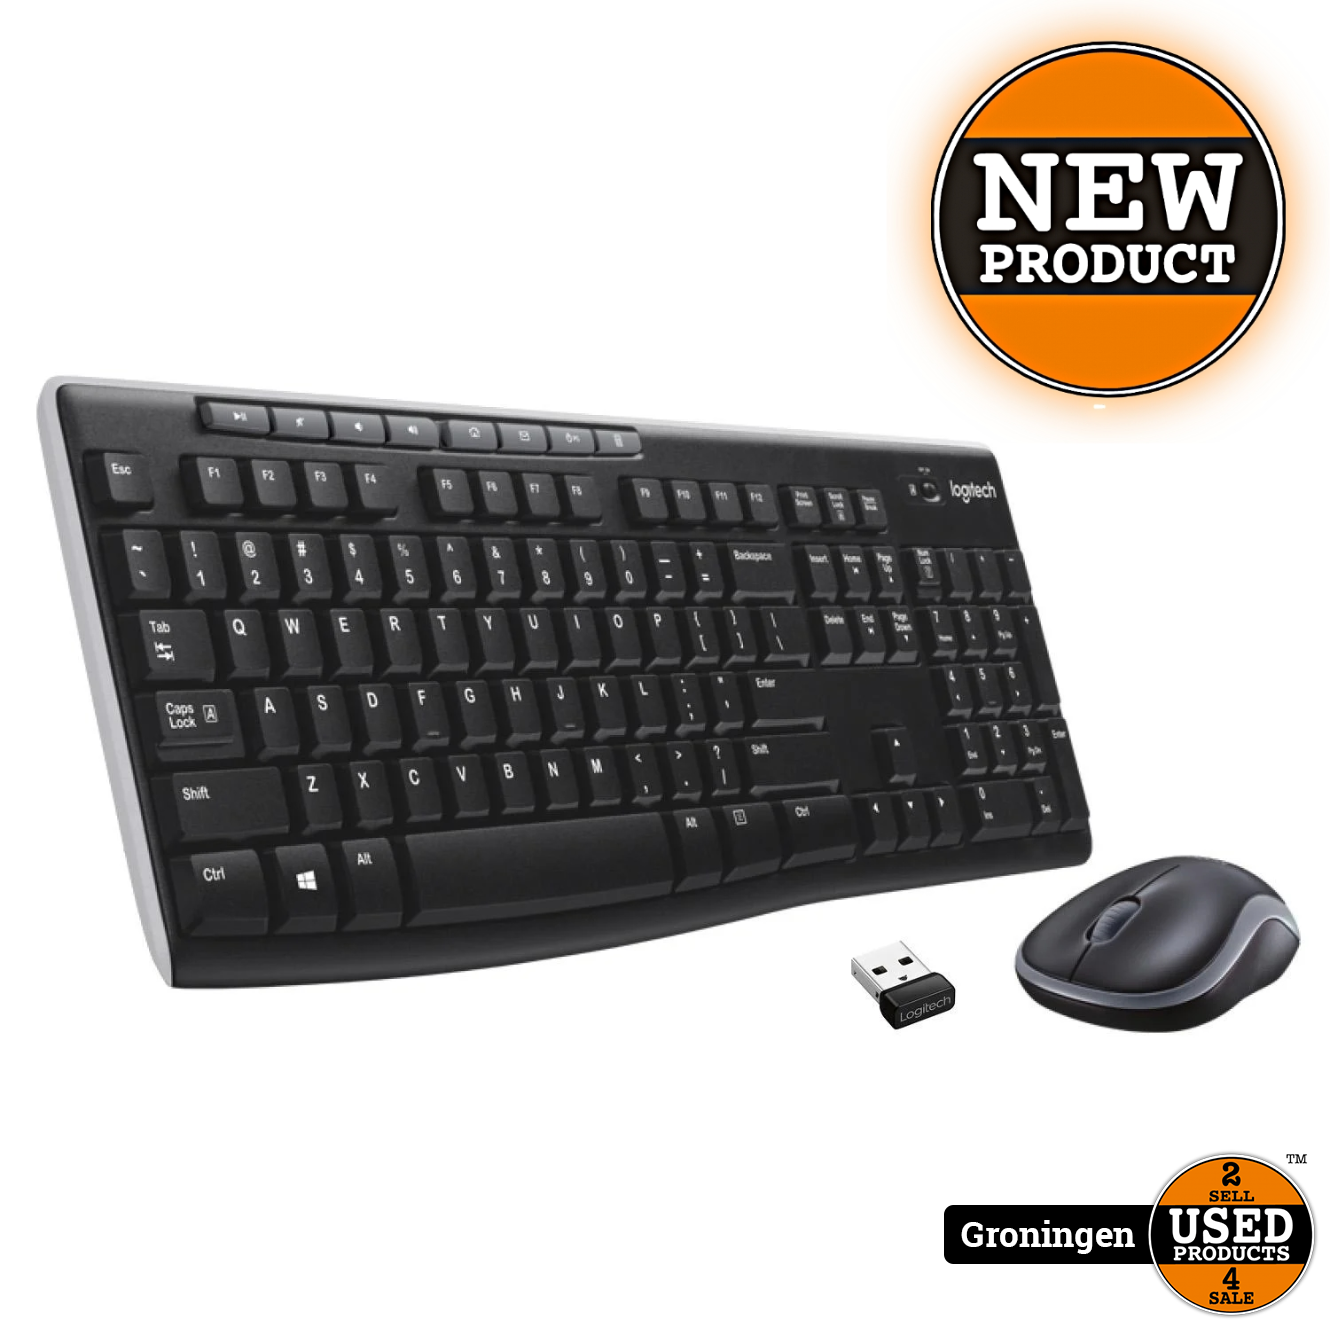 Logitech MK270 (Qwerty US) Draadloos muis | NIEUW - Used Products Groningen